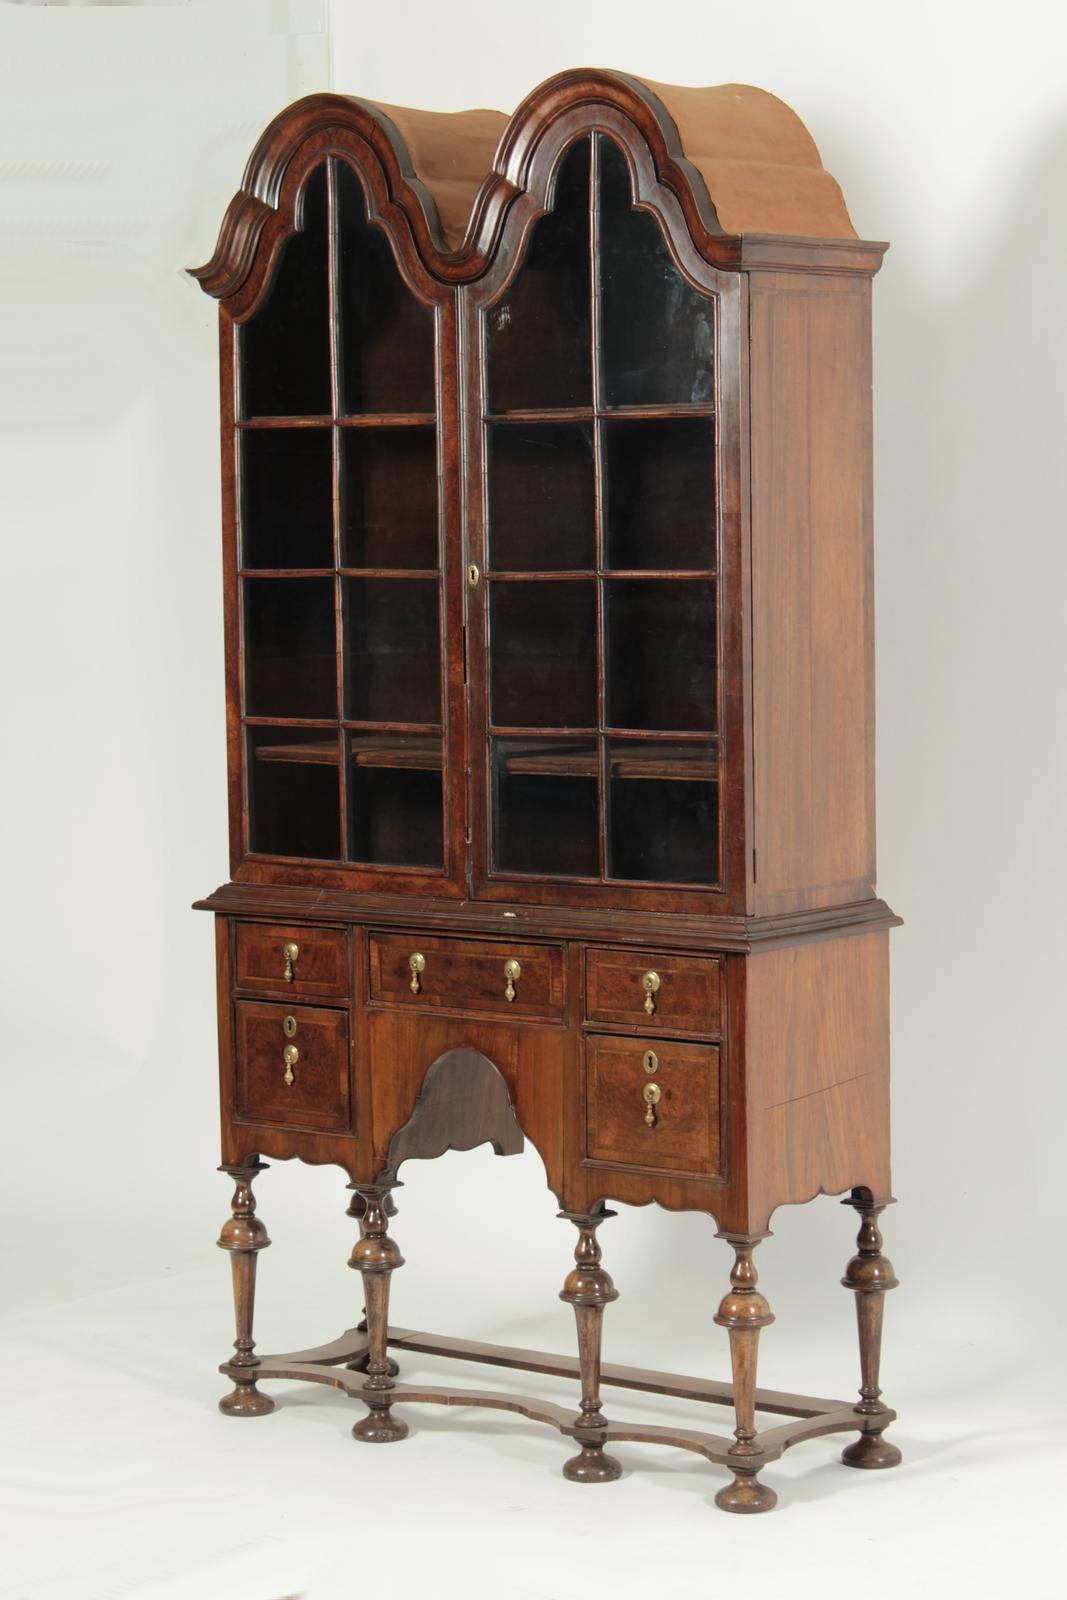 18th century double tombstone top walnut display cabinet on stand

--wonderful patina wood figuring
--original glass and finish
--trumpet legged base
--wonderful moderate height

Provenance: Ex Christies.